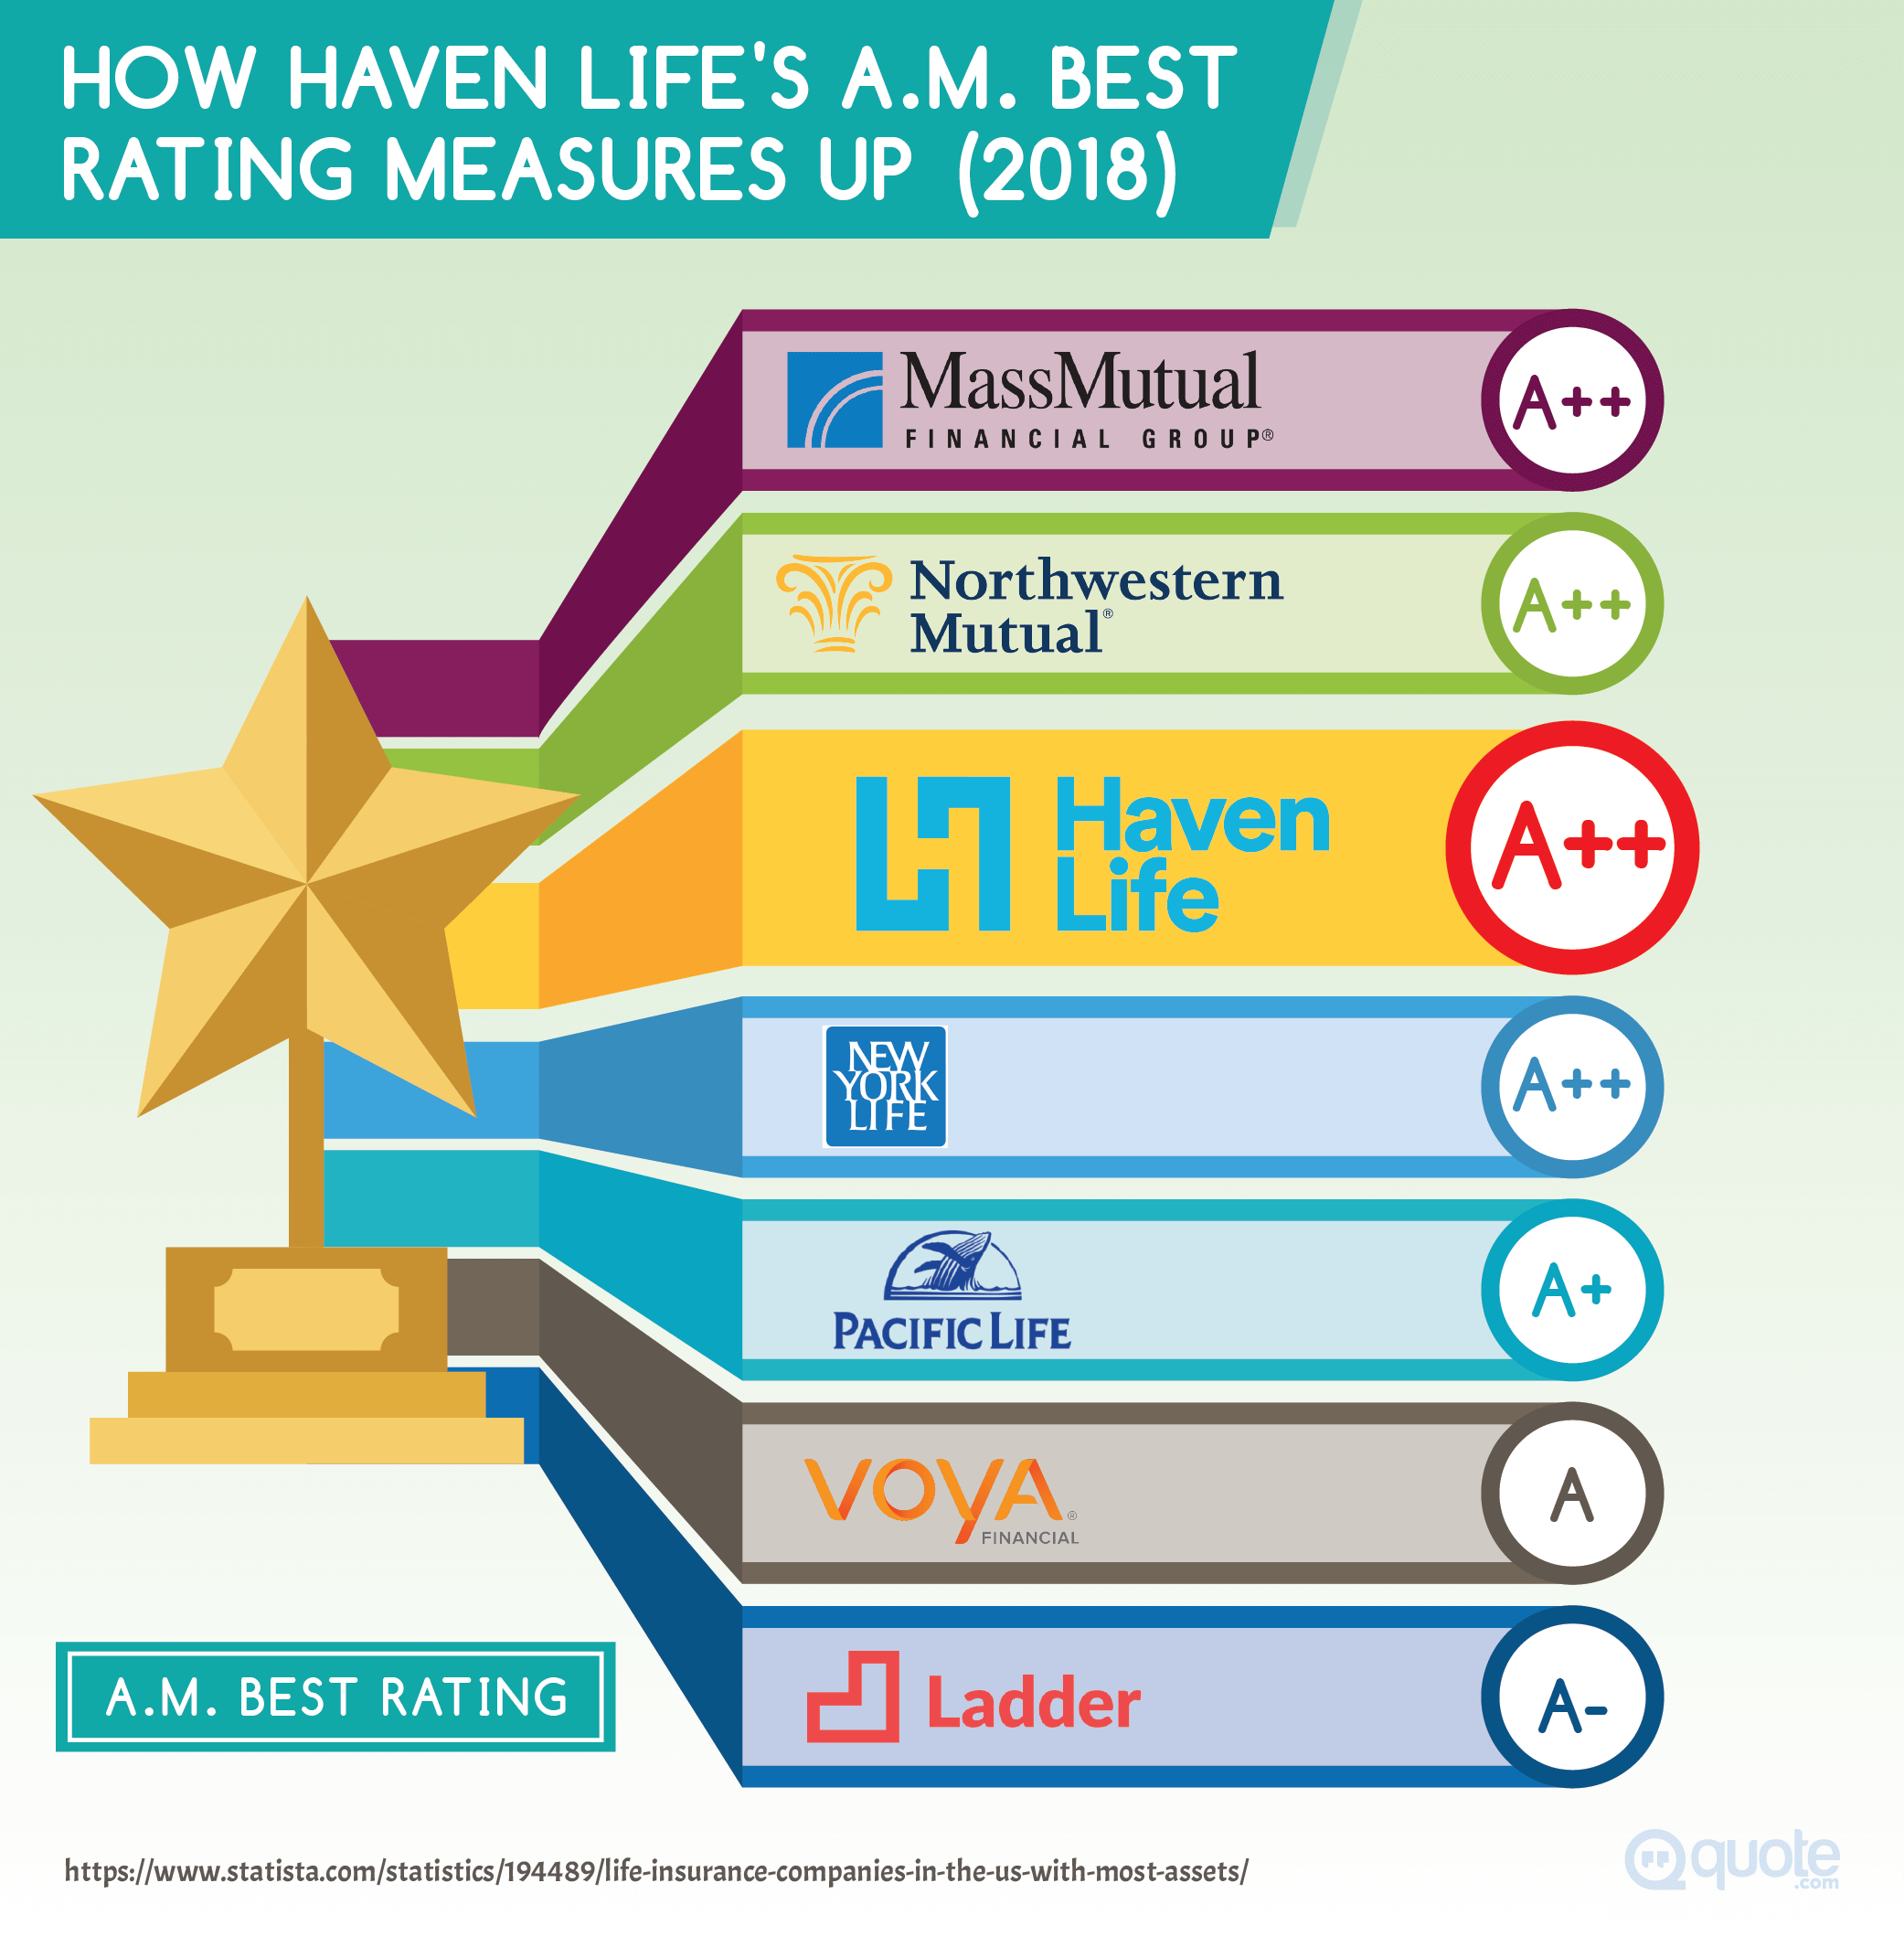 How Haven Life's A.M. Best Rating Measures Up in 2018